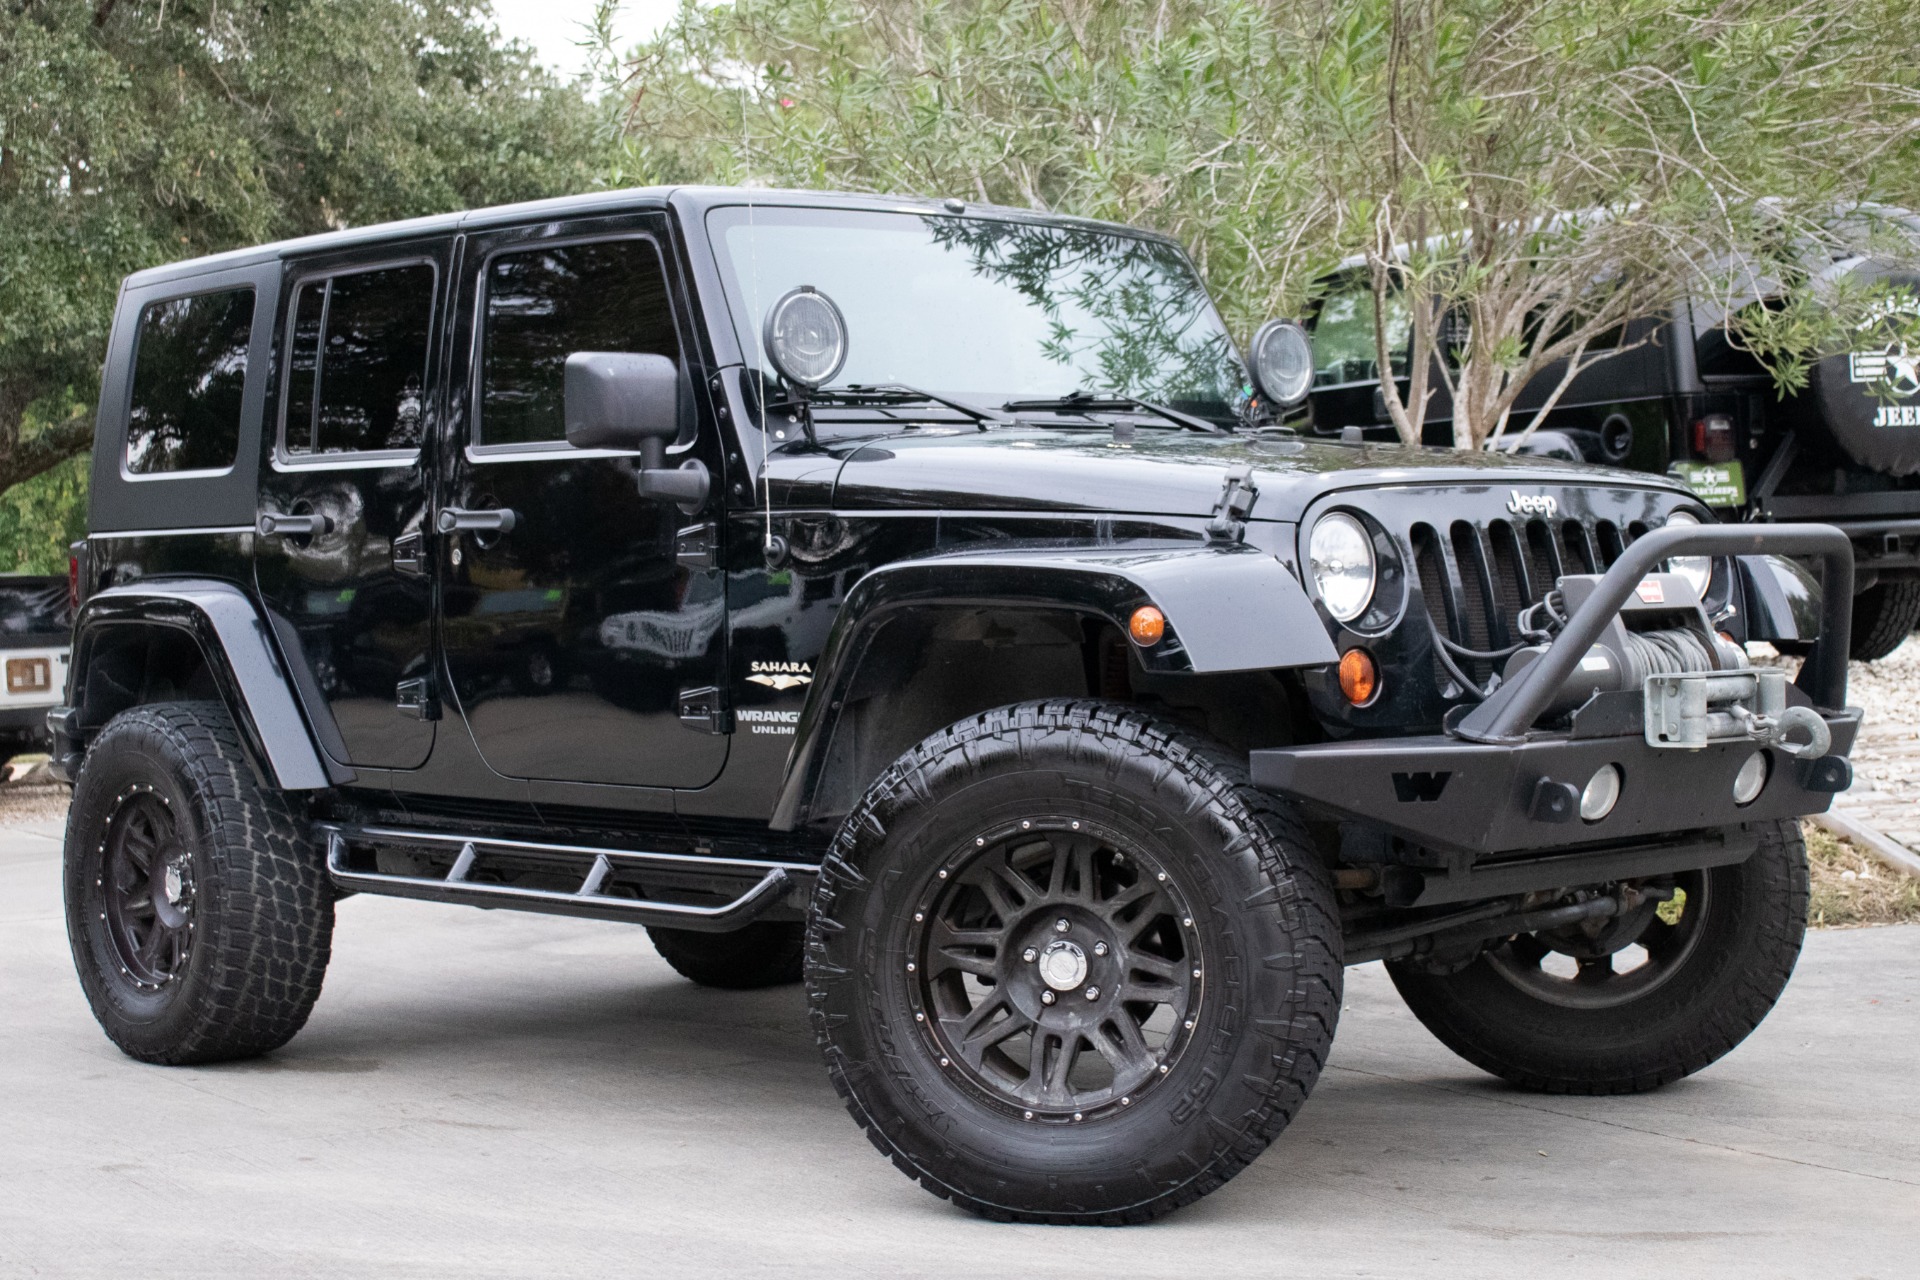 Used 2008 Jeep Wrangler Unlimited Sahara For Sale ($21,995 ...